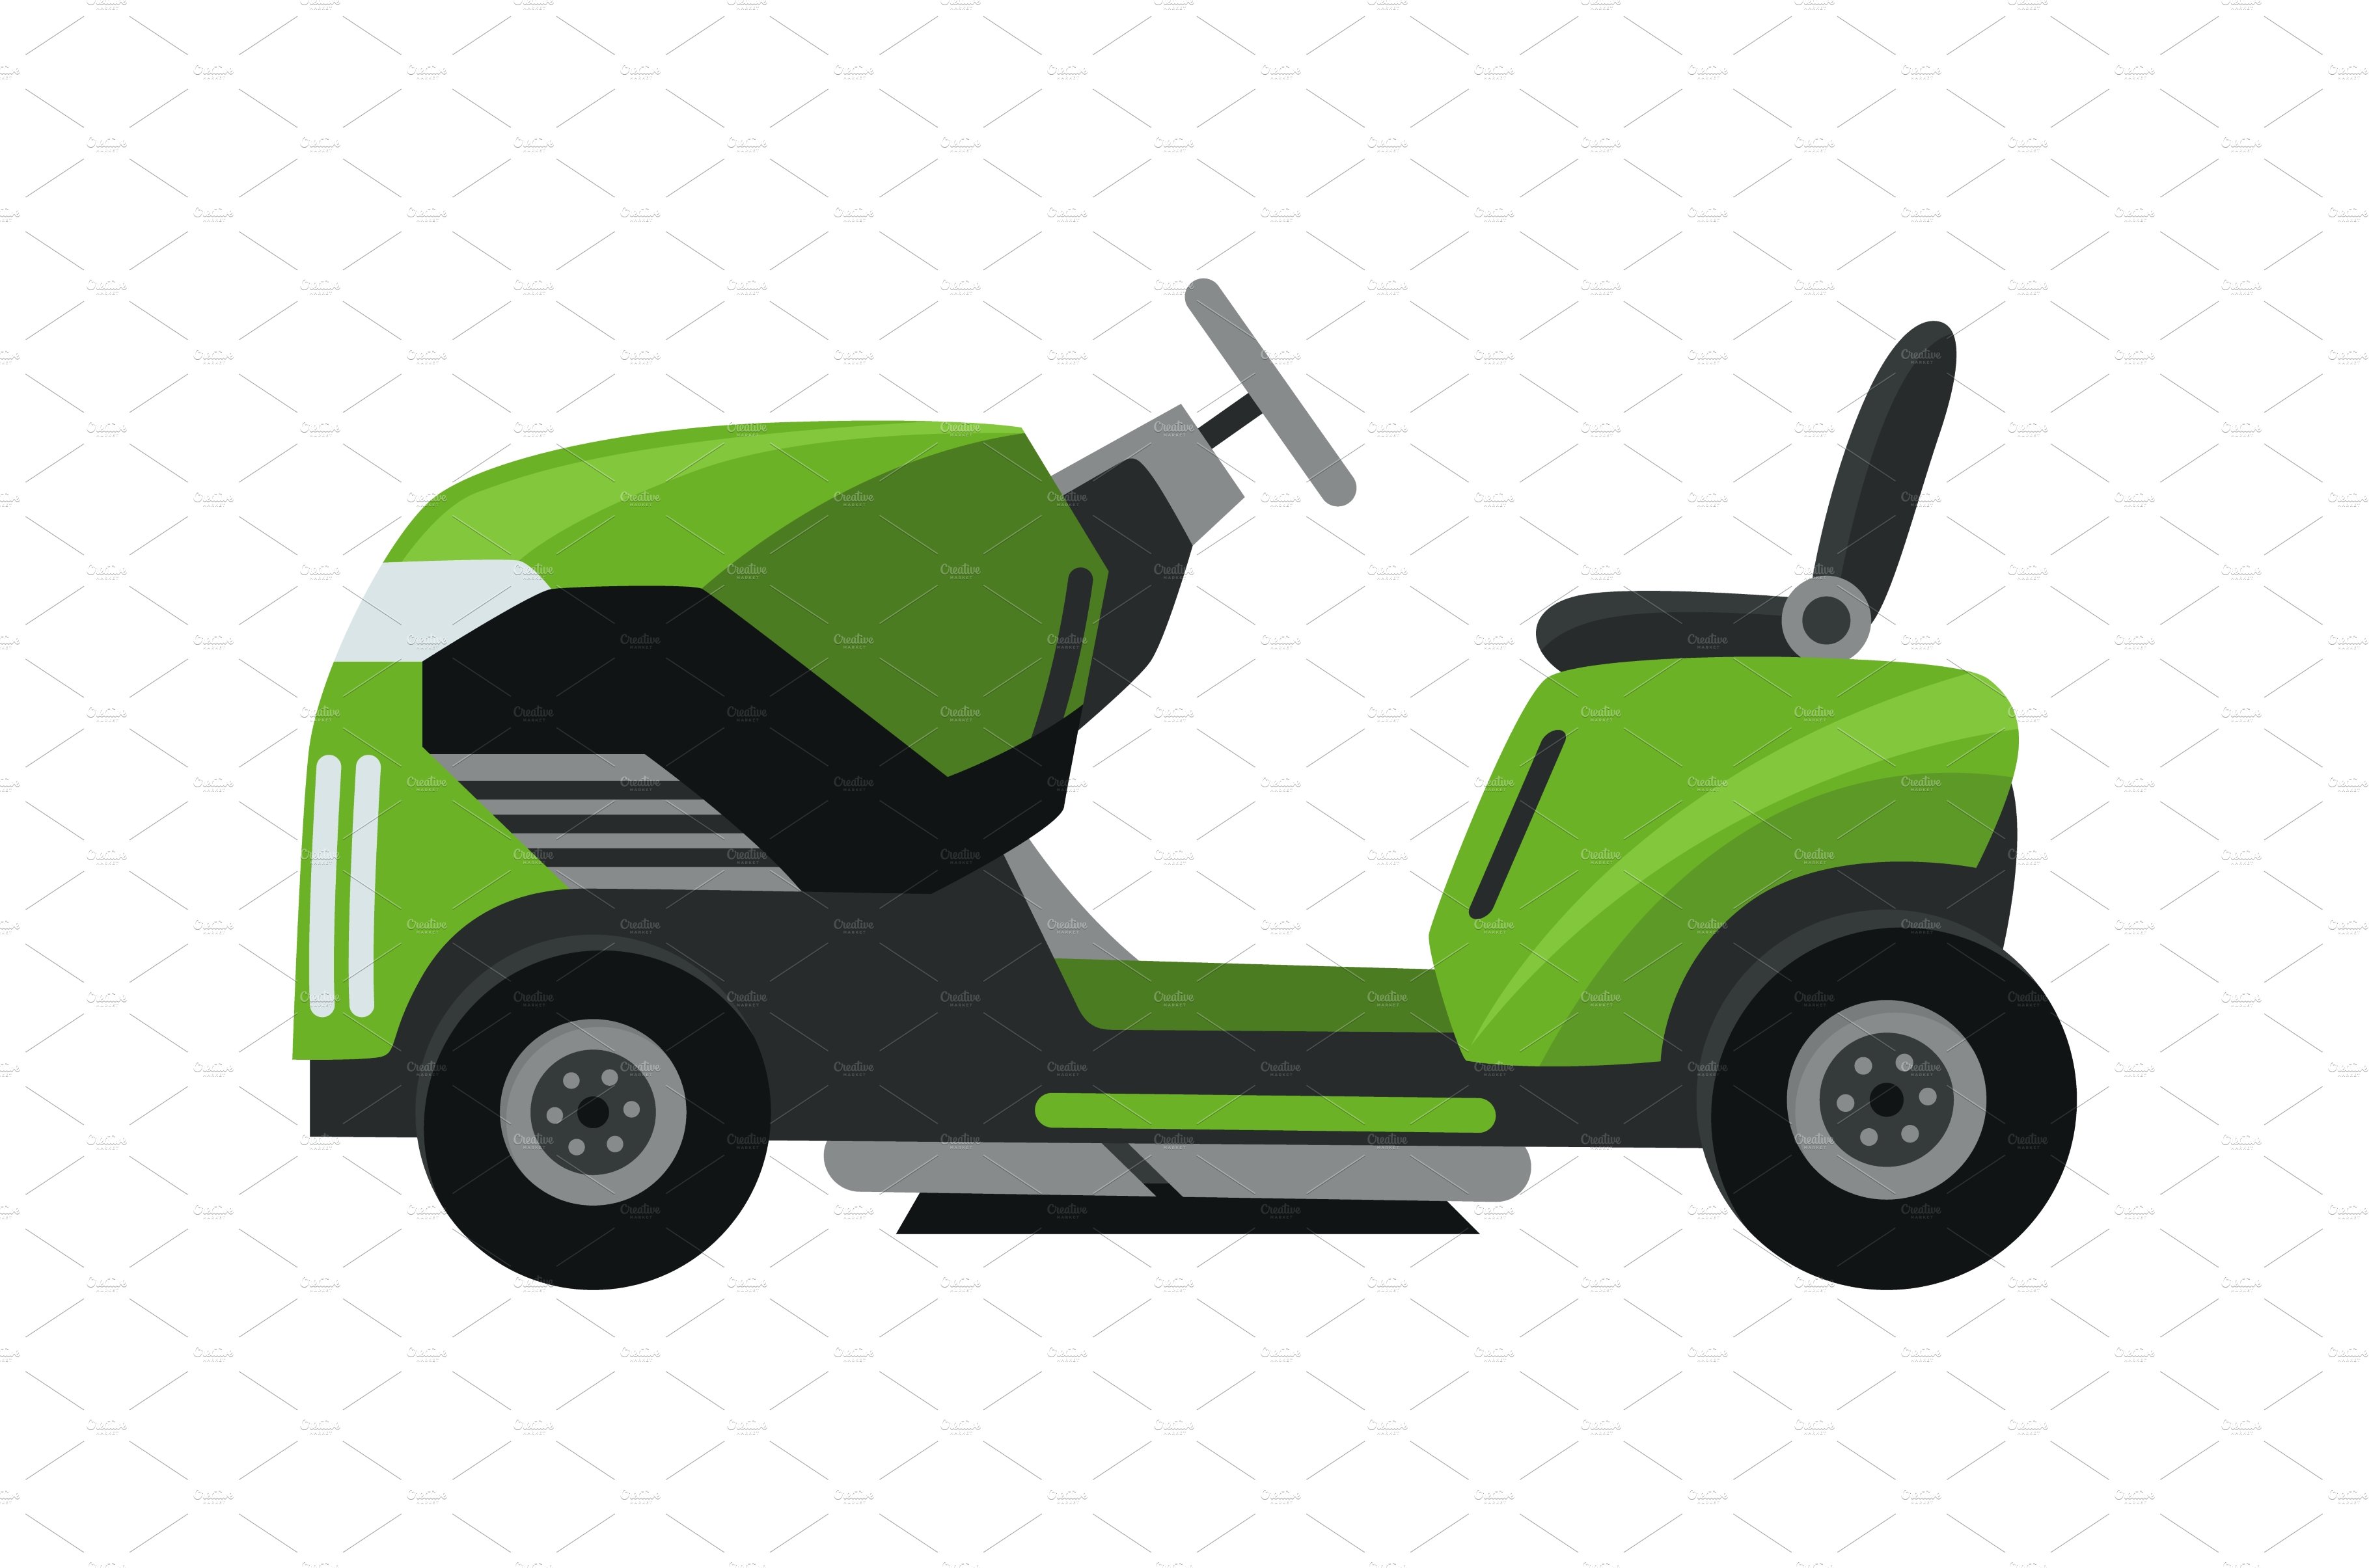 Lawn mower machine in green cover image.